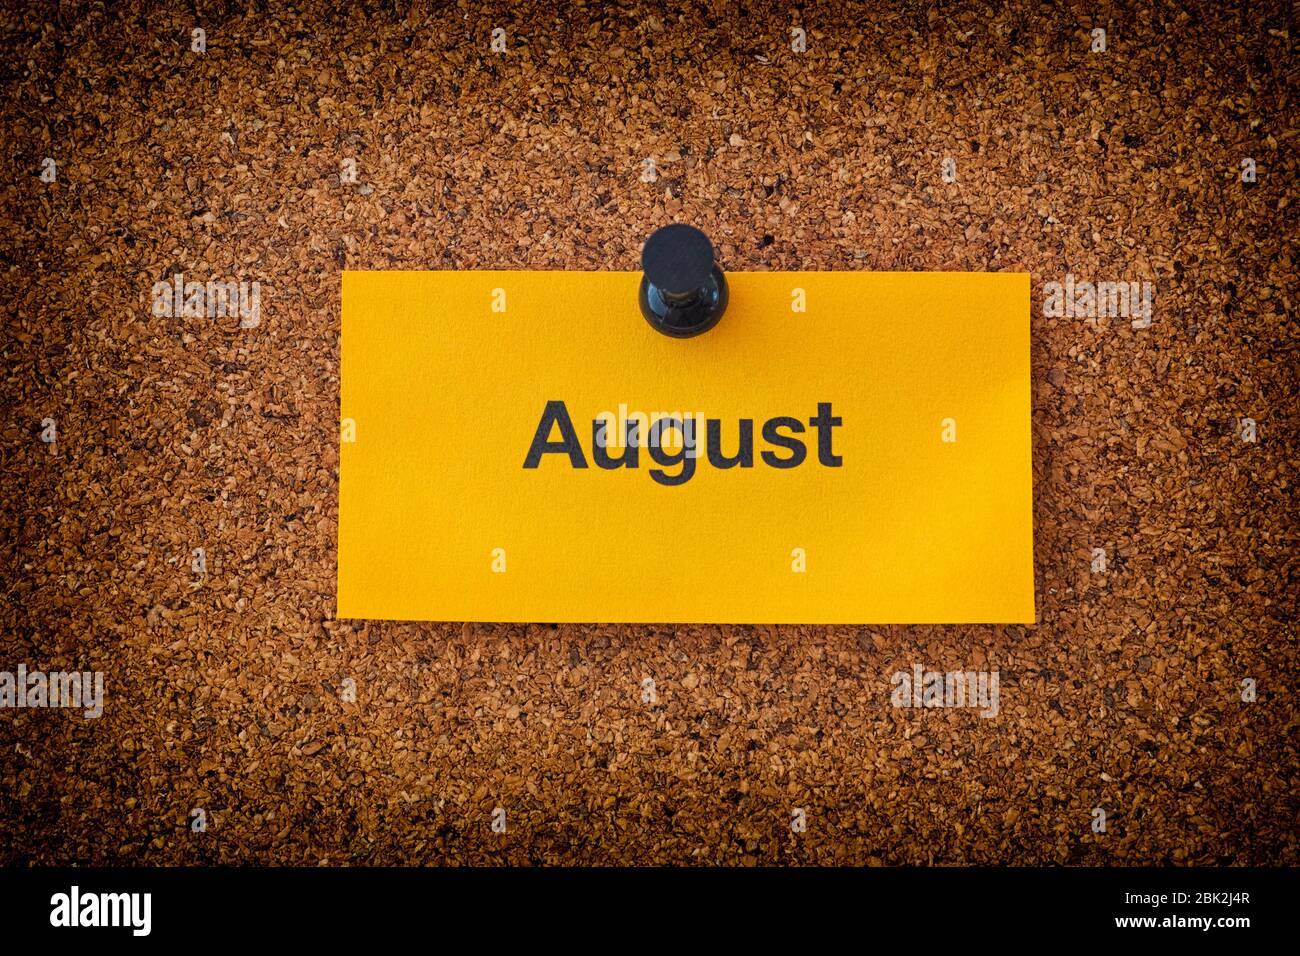 August written on a yellow piece of paper that is on a bulletin board. Close up. Stock Photo